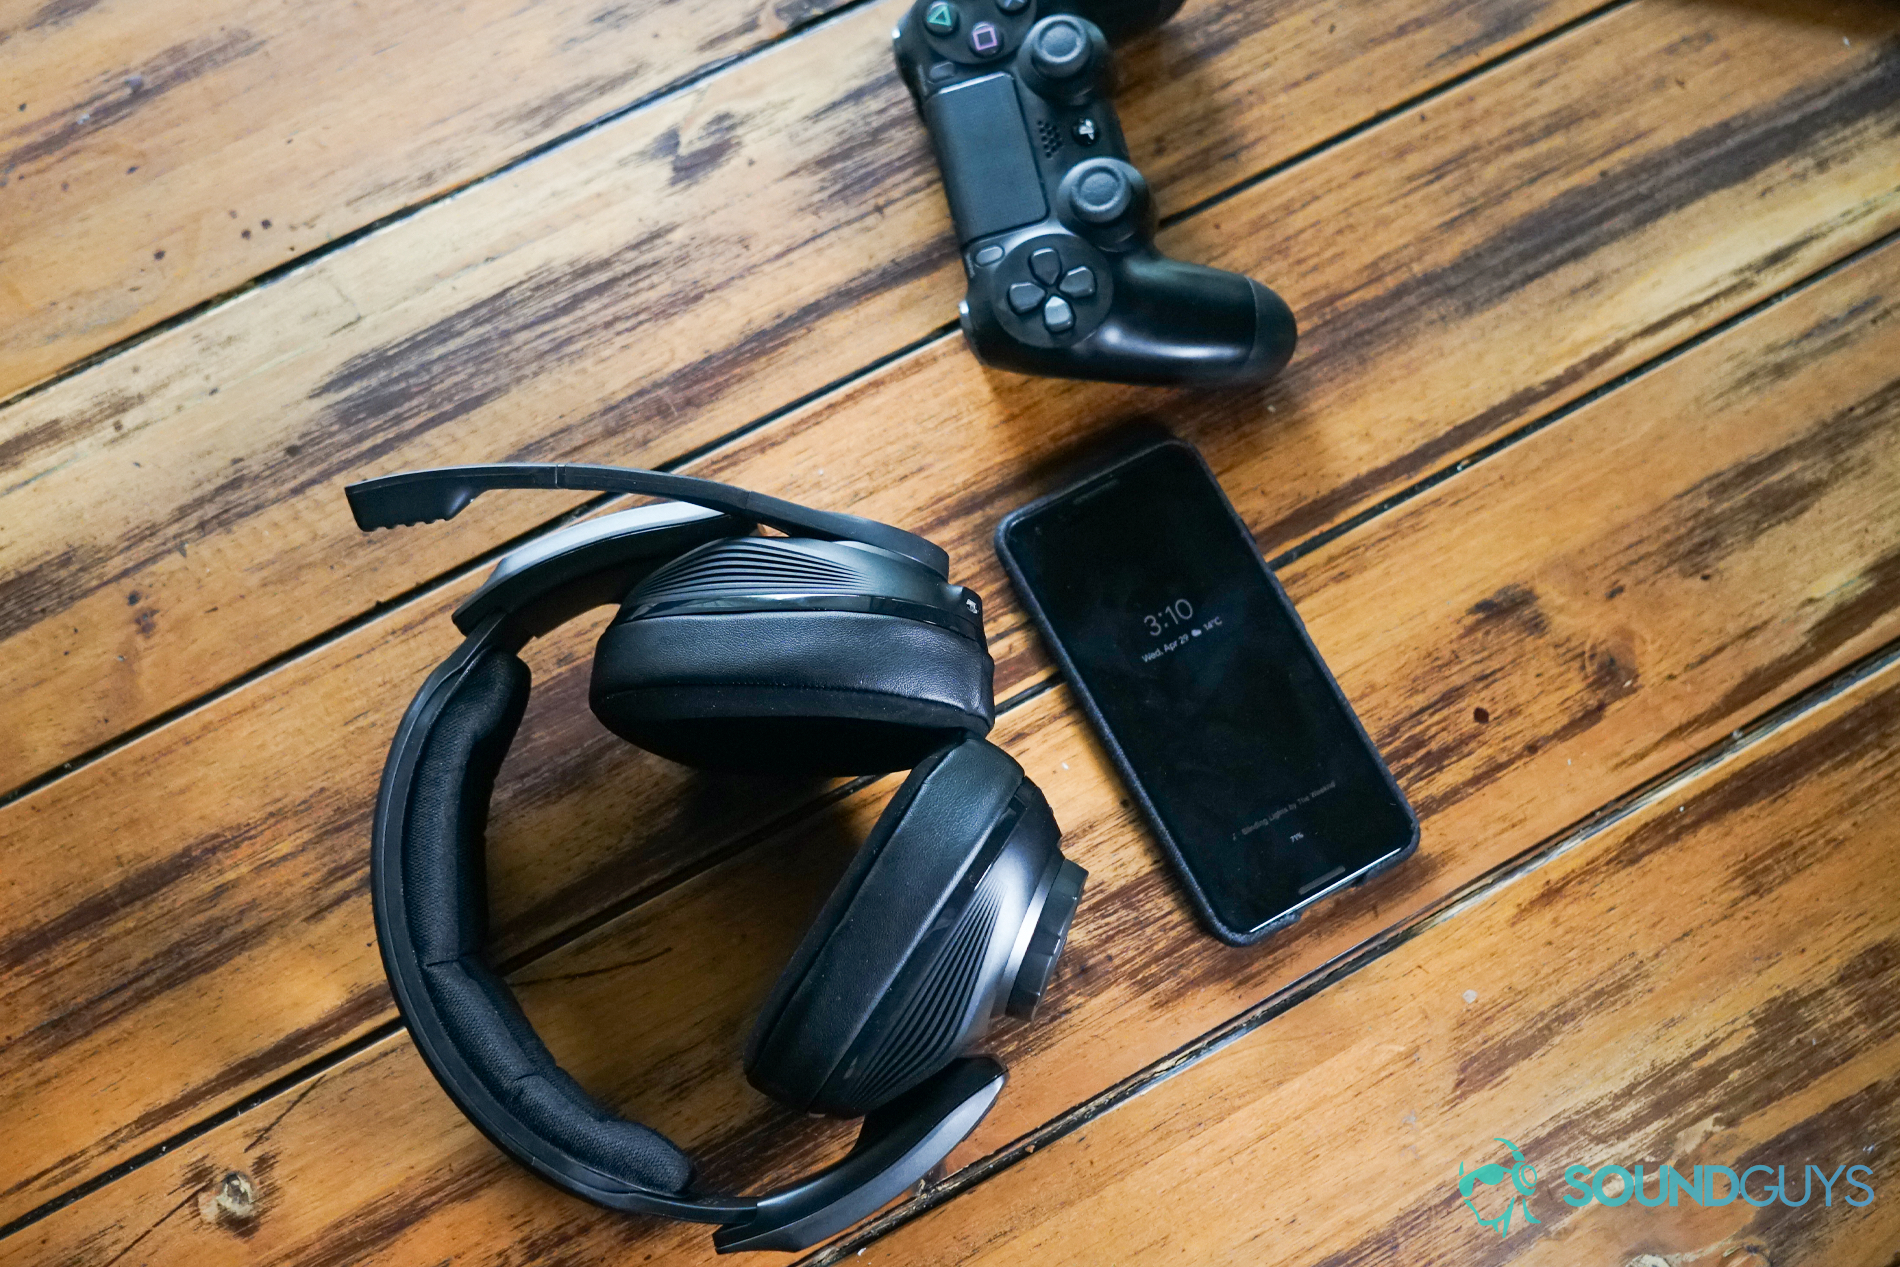 How To Connect Bluetooth Earphones To Phone